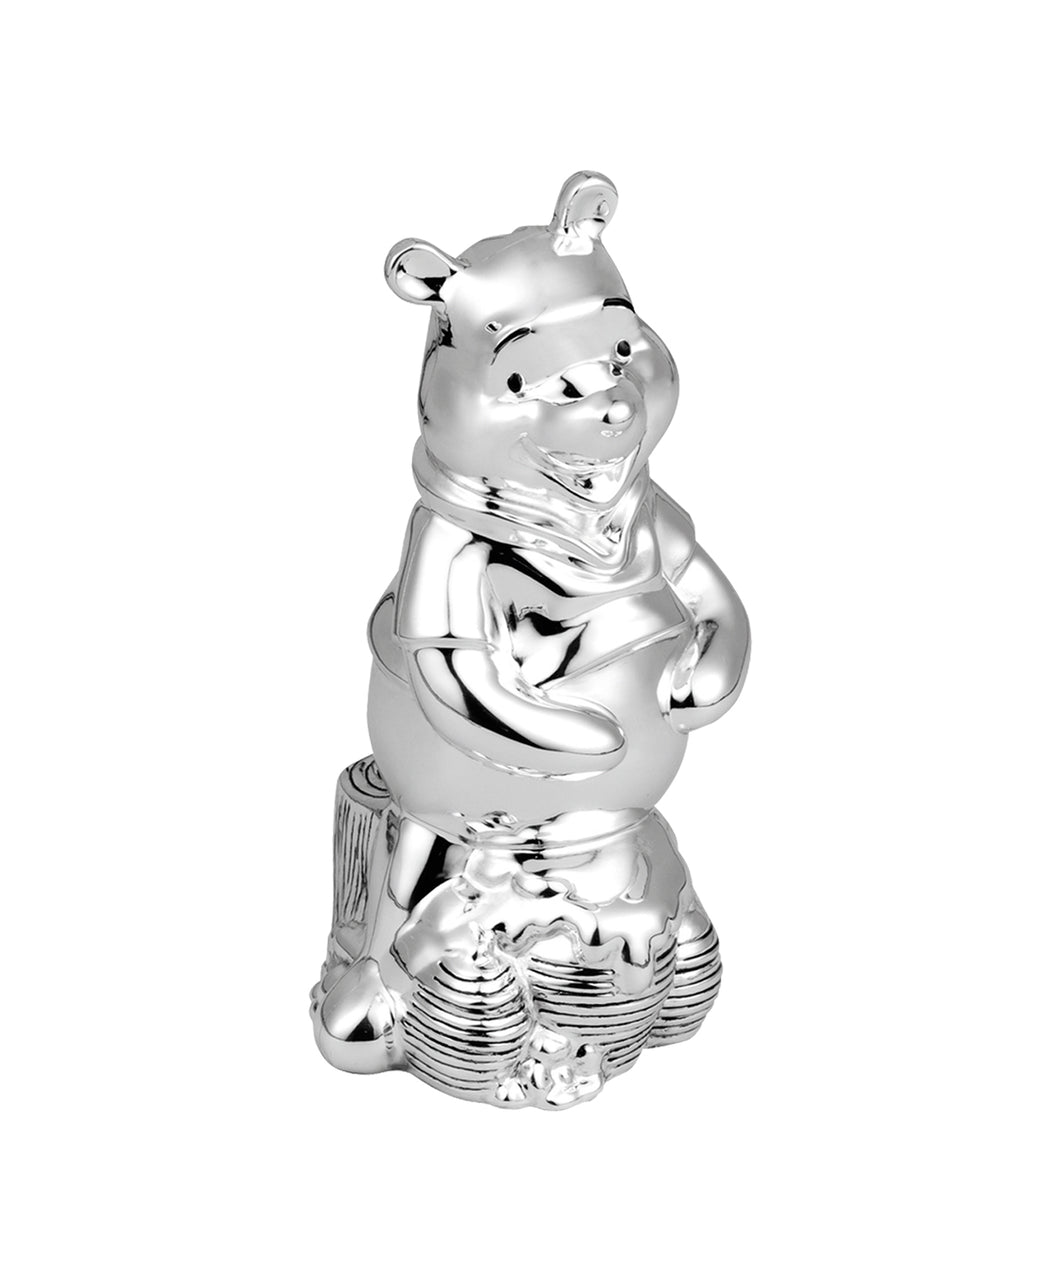 Silver Plated Winnie The Pooh Money Box